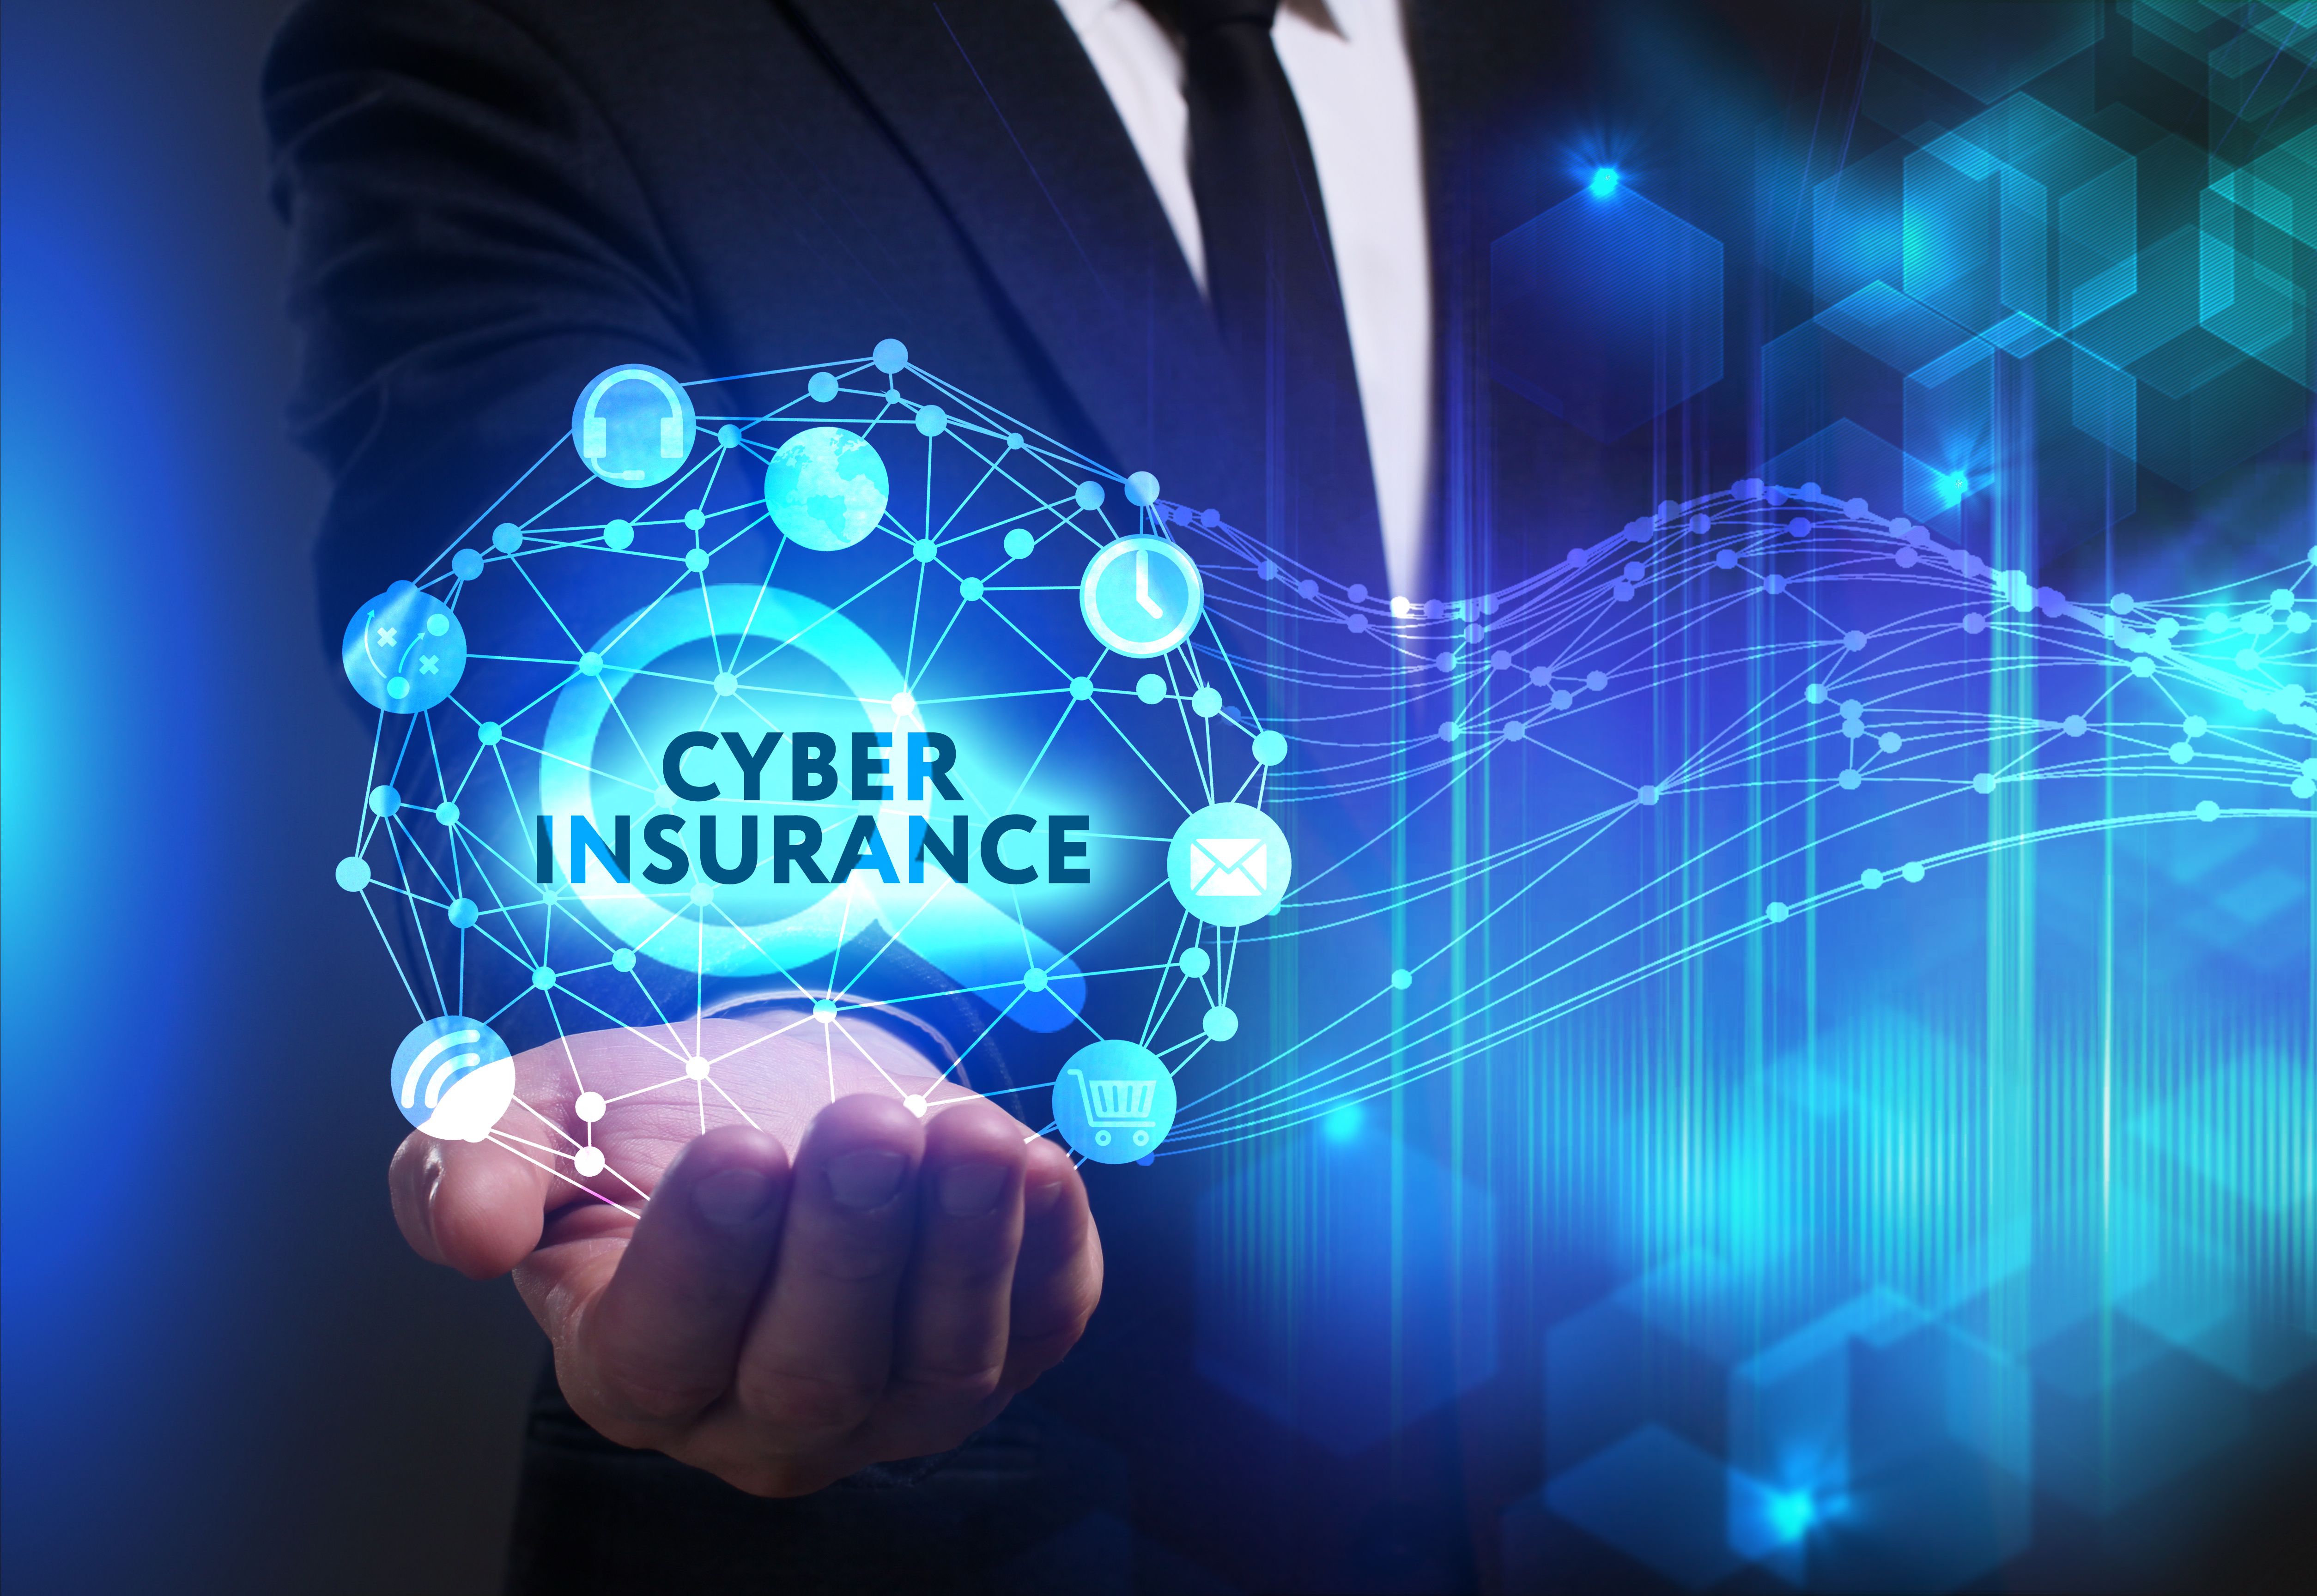 Technical controls your business may need to qualify for cyber-insurance